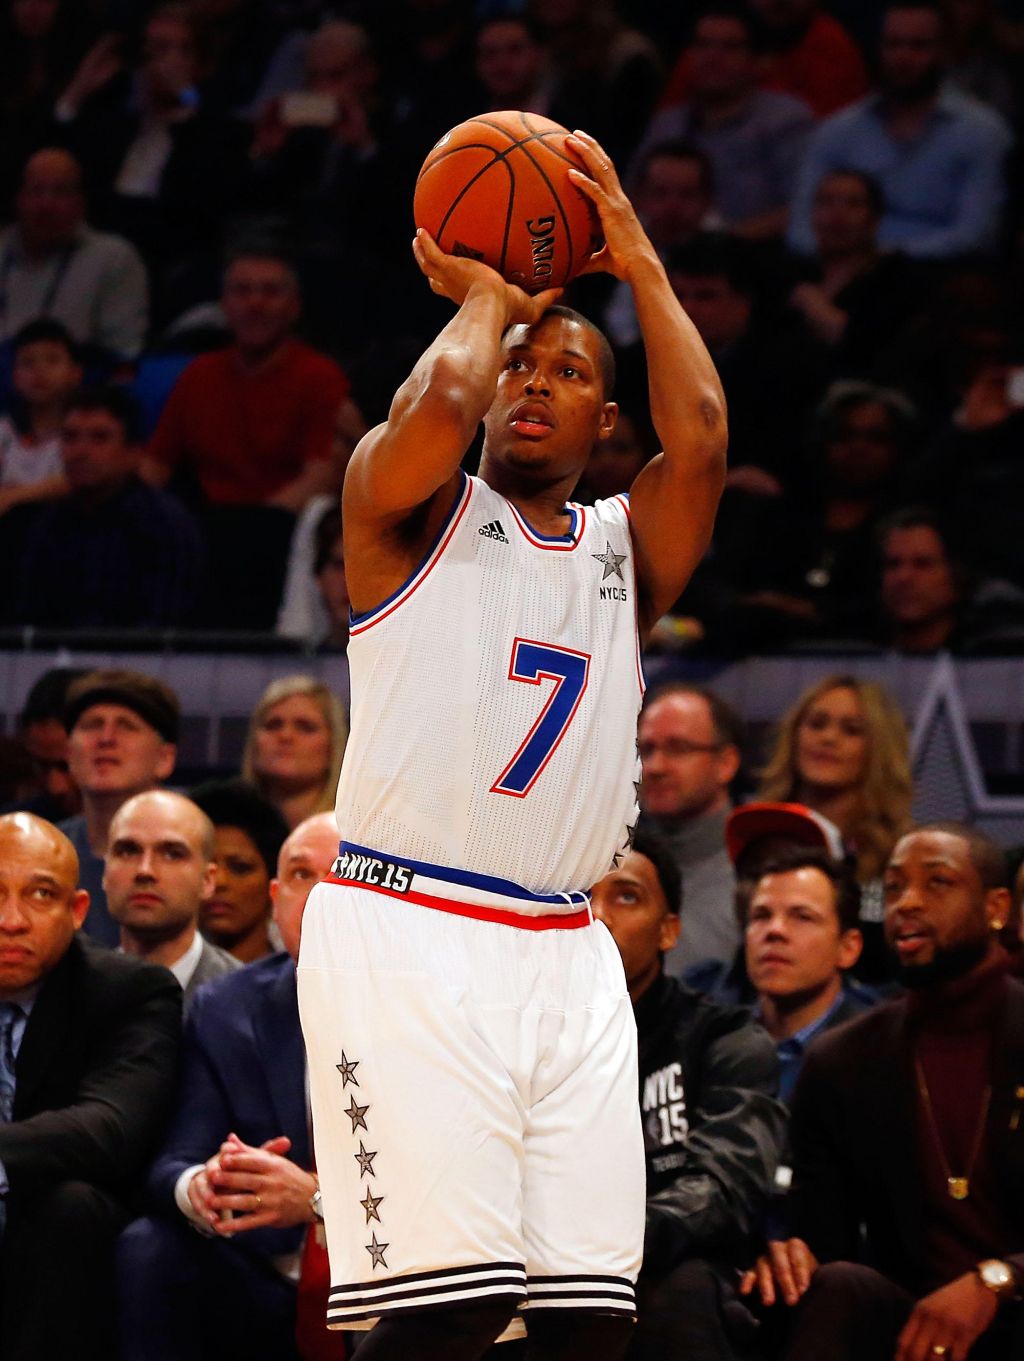 Kyle Lowry at 2015 NBA All-Star game